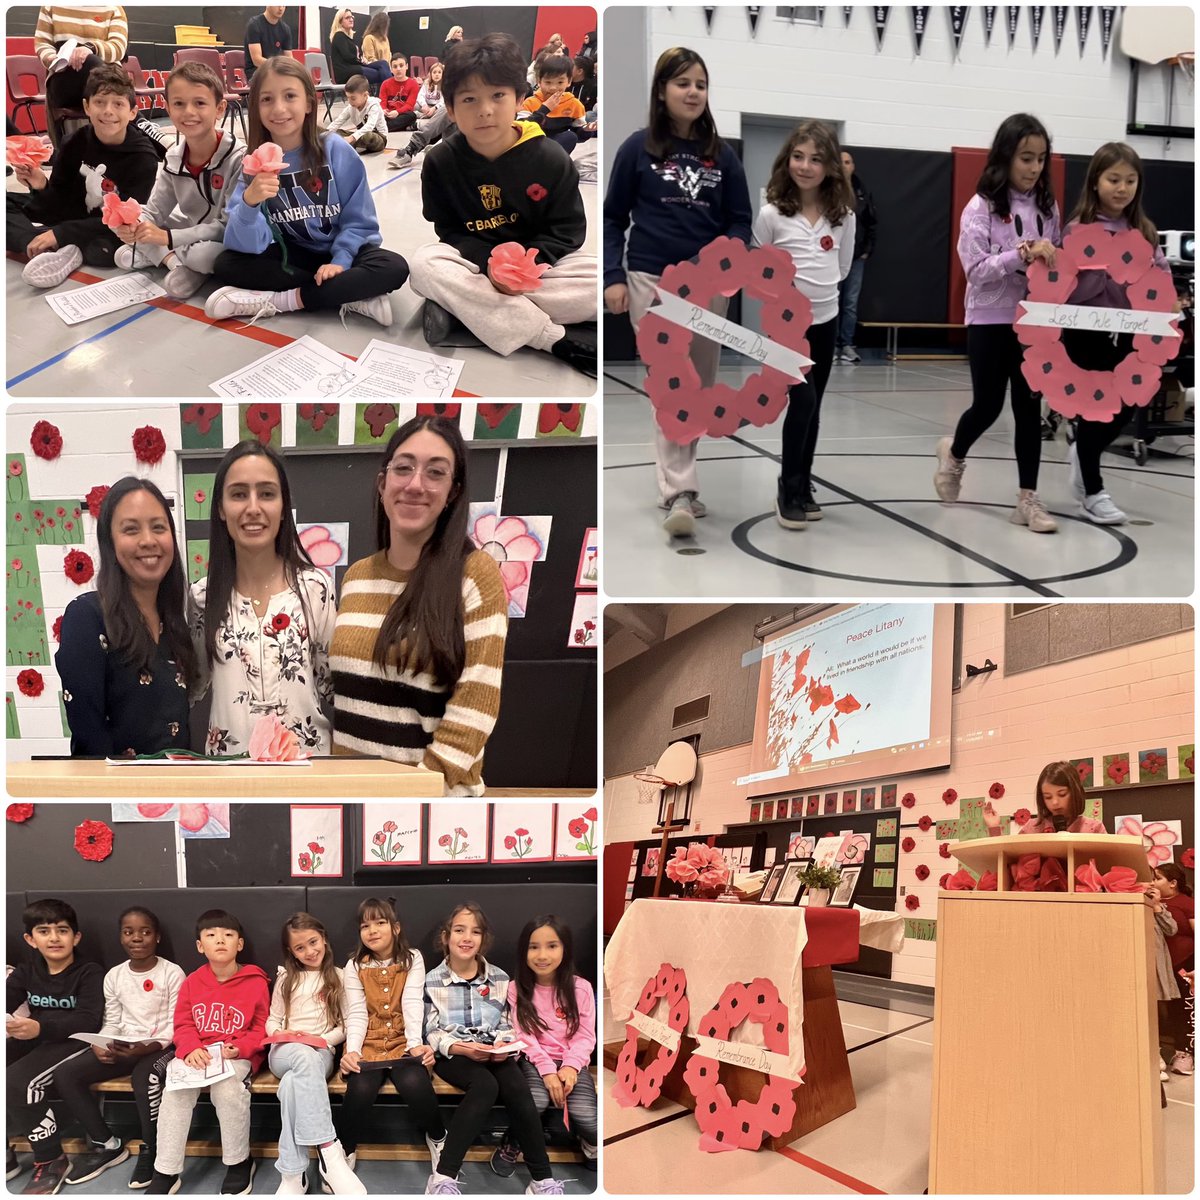 LOC gathered today to honour veterans who have given their lives as well as those who continue to work towards making our world a safe and peaceful place. @ycdsb @ElizabethCrowe_ @DomenicScuglia